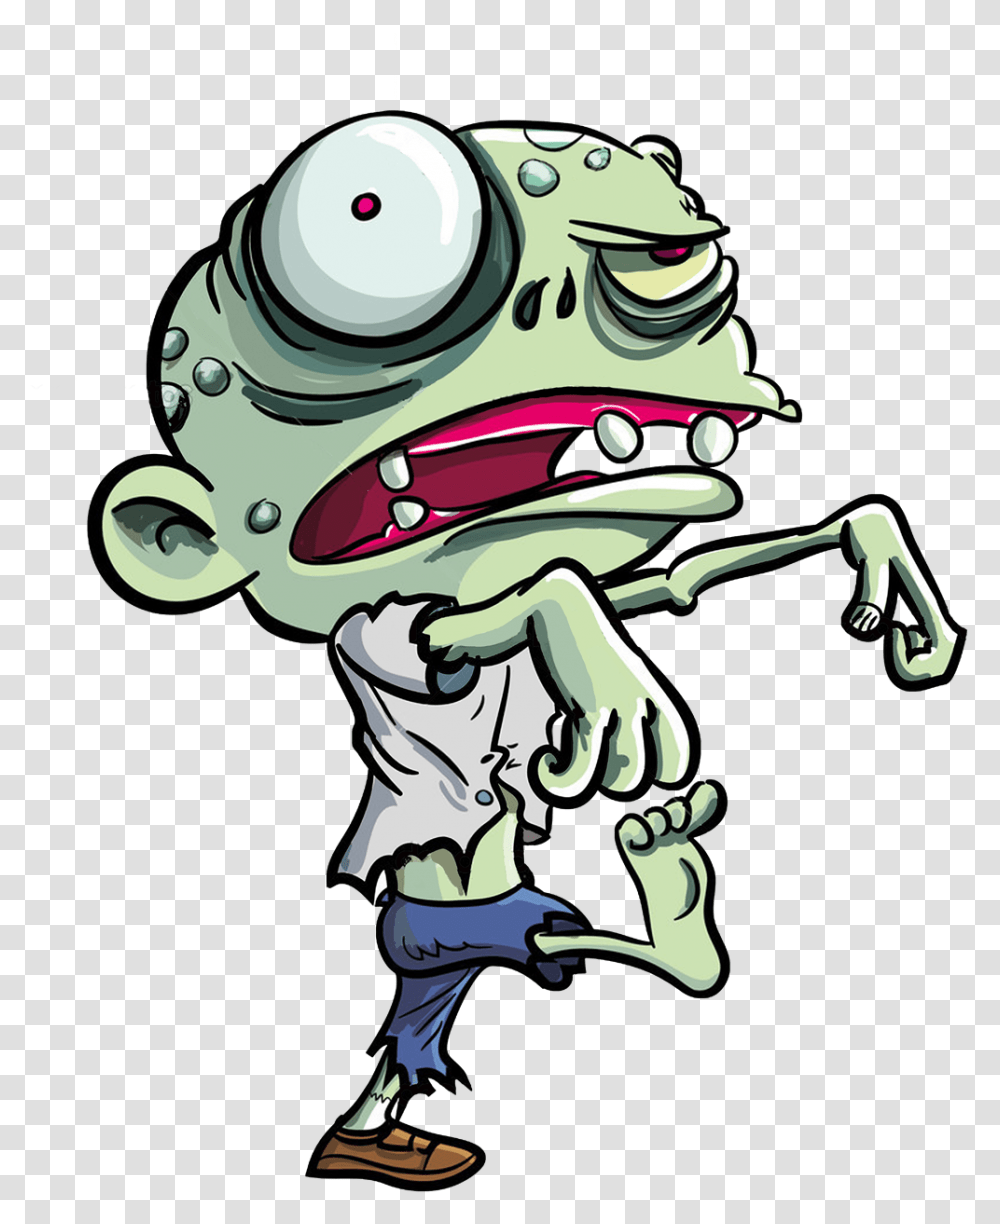 Cartoon Zombie Background Image Cute Zombie Cartoon, Drawing, Astronaut, Scientist Transparent Png